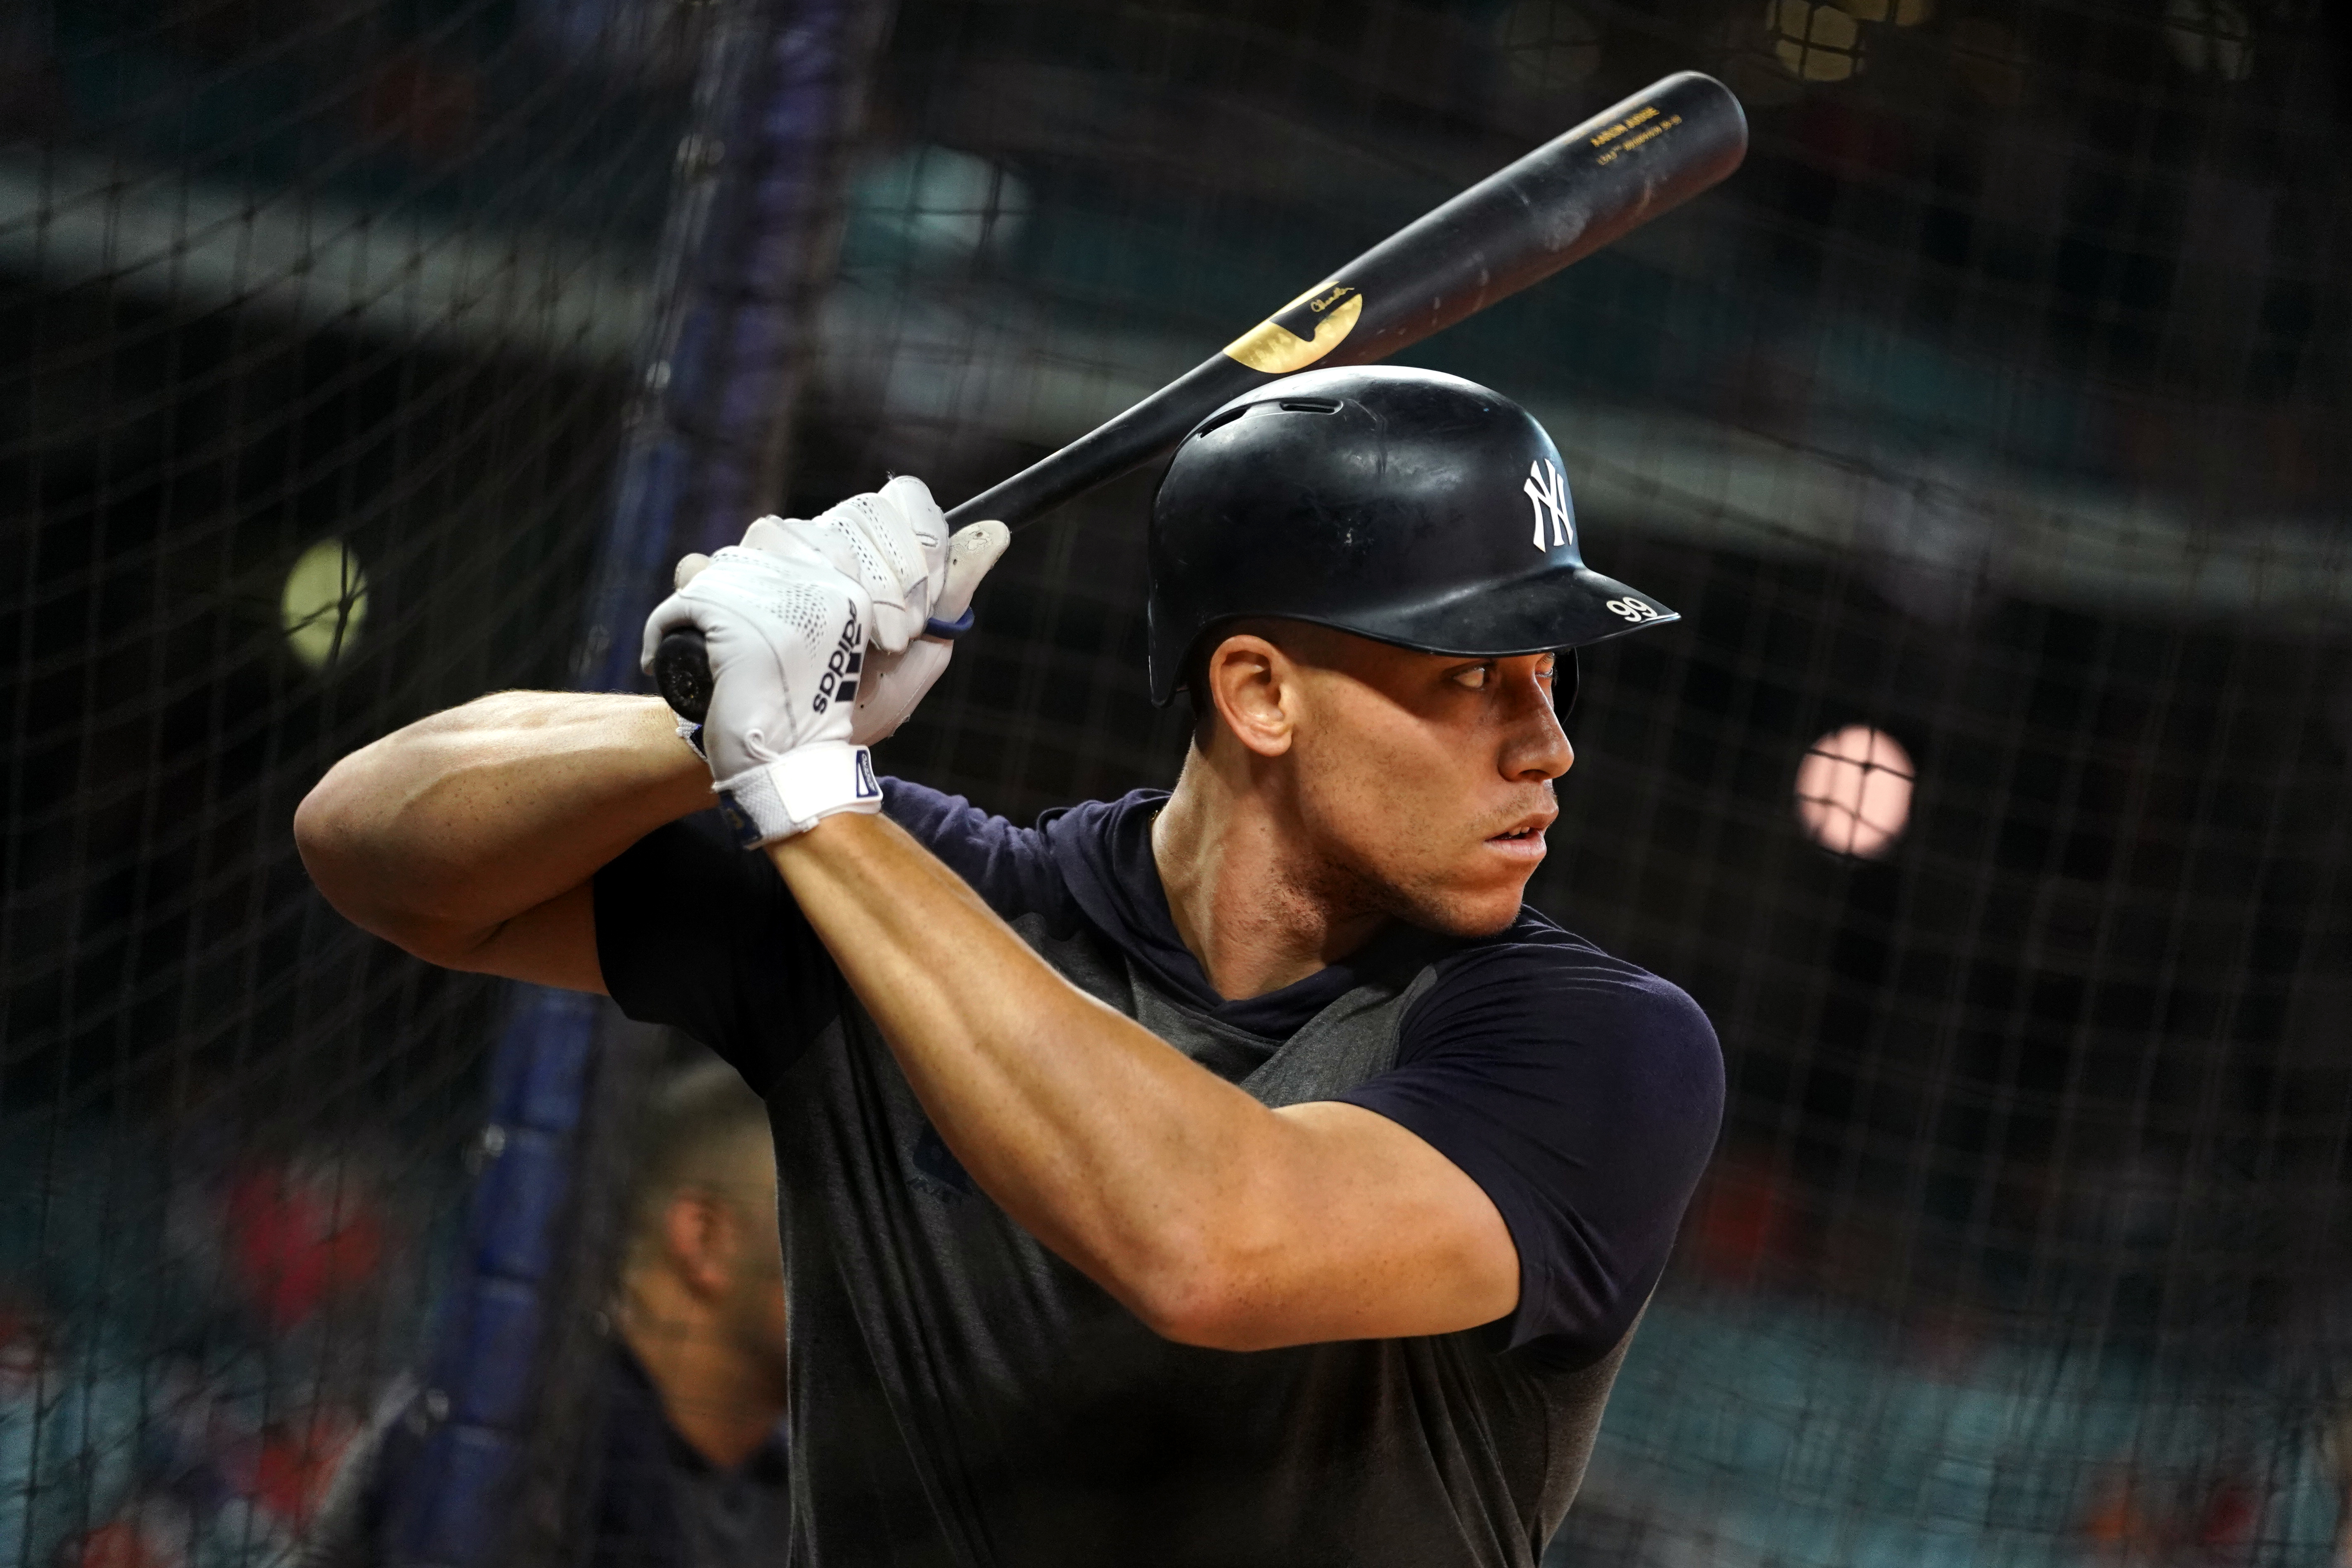 Aaron Judge #99 of the New York Yankees hits batting practice prior to Game 6 of the ALCS between the New York Yankees and the Houston Astros at Minute Maid Park on Saturday, October 19, 2019 in Houston, Texas.